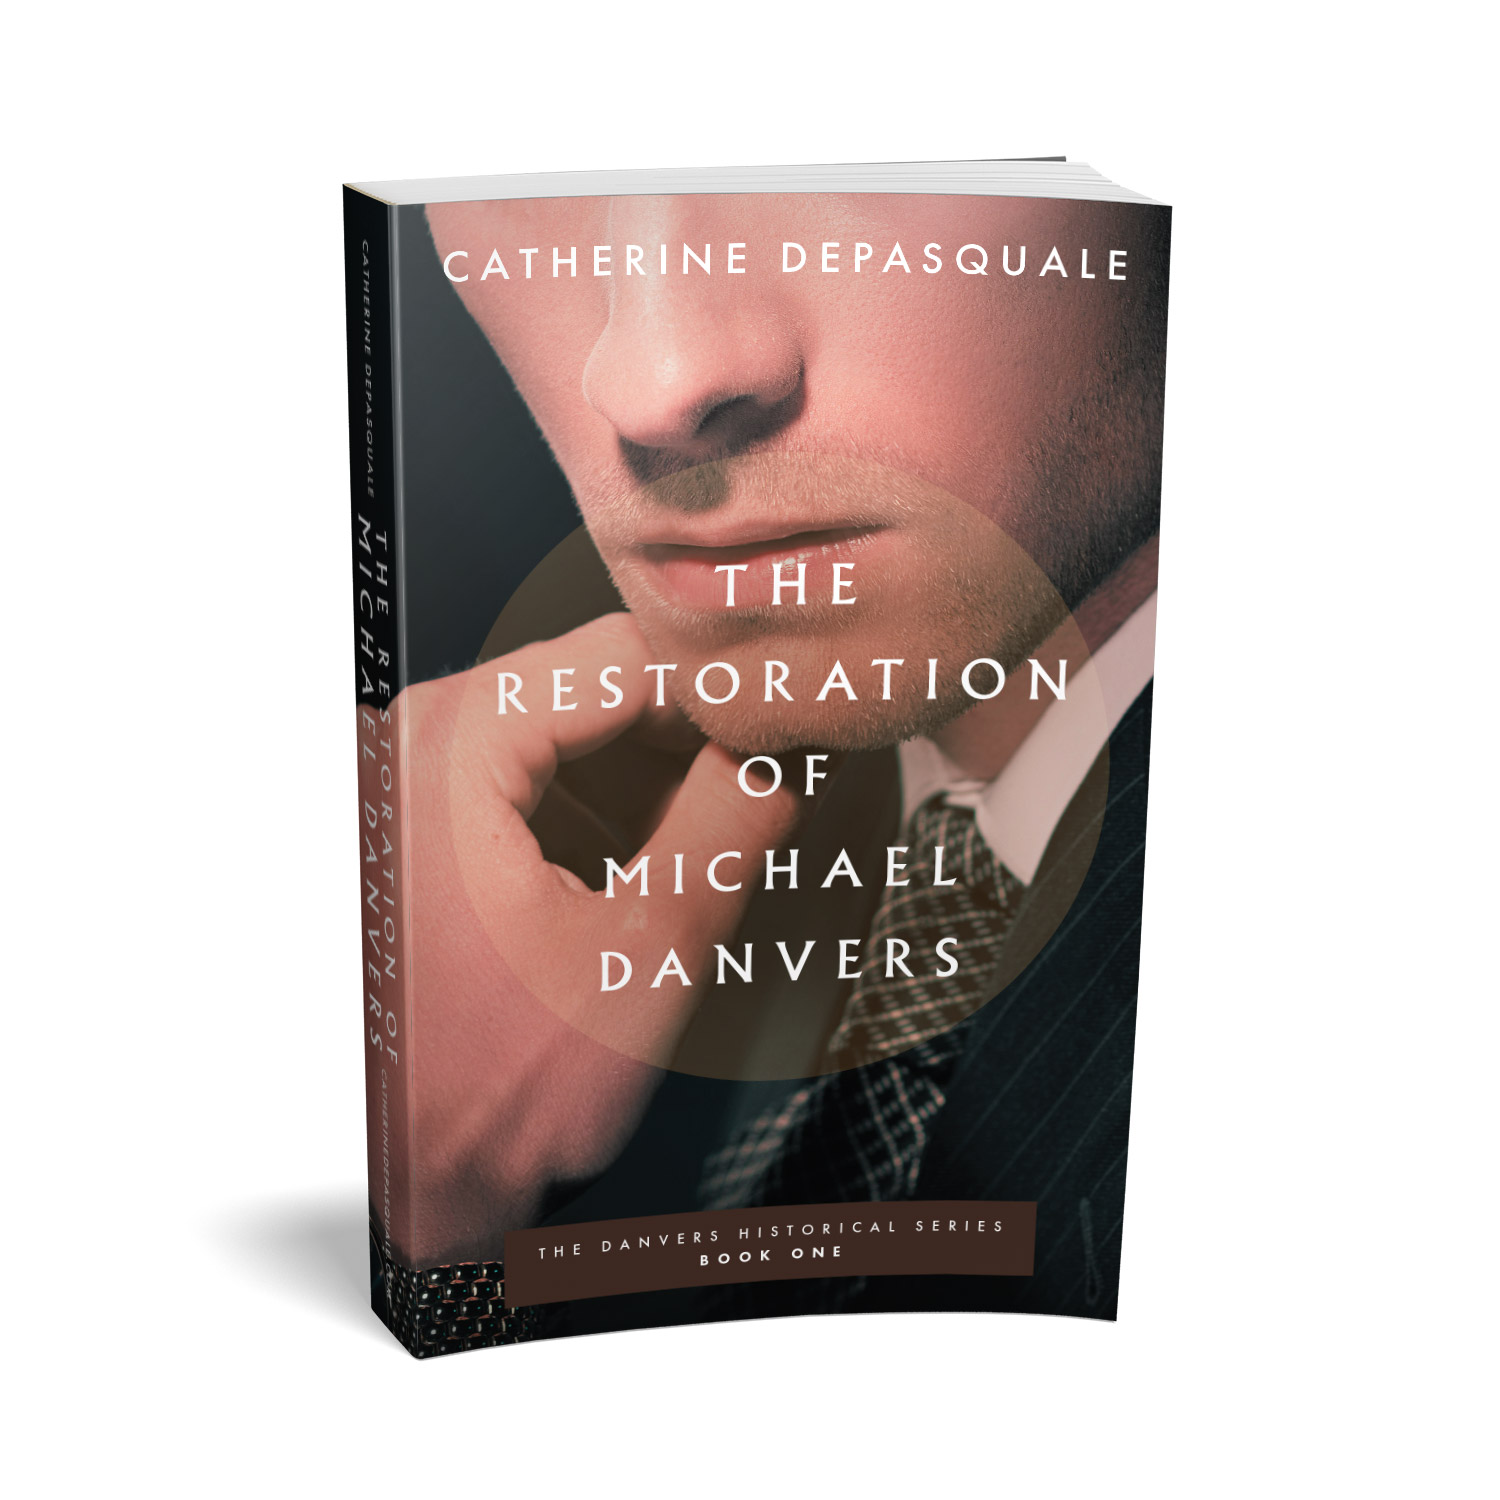 'The Restoration of Michael Danvers' is a faith-focussed character study, set in the late 1940s. The author is Catherine DePasquale. The book cover design and interior formatting are by Mark Thomas. To learn more about what Mark could do for your book, please visit coverness.com.